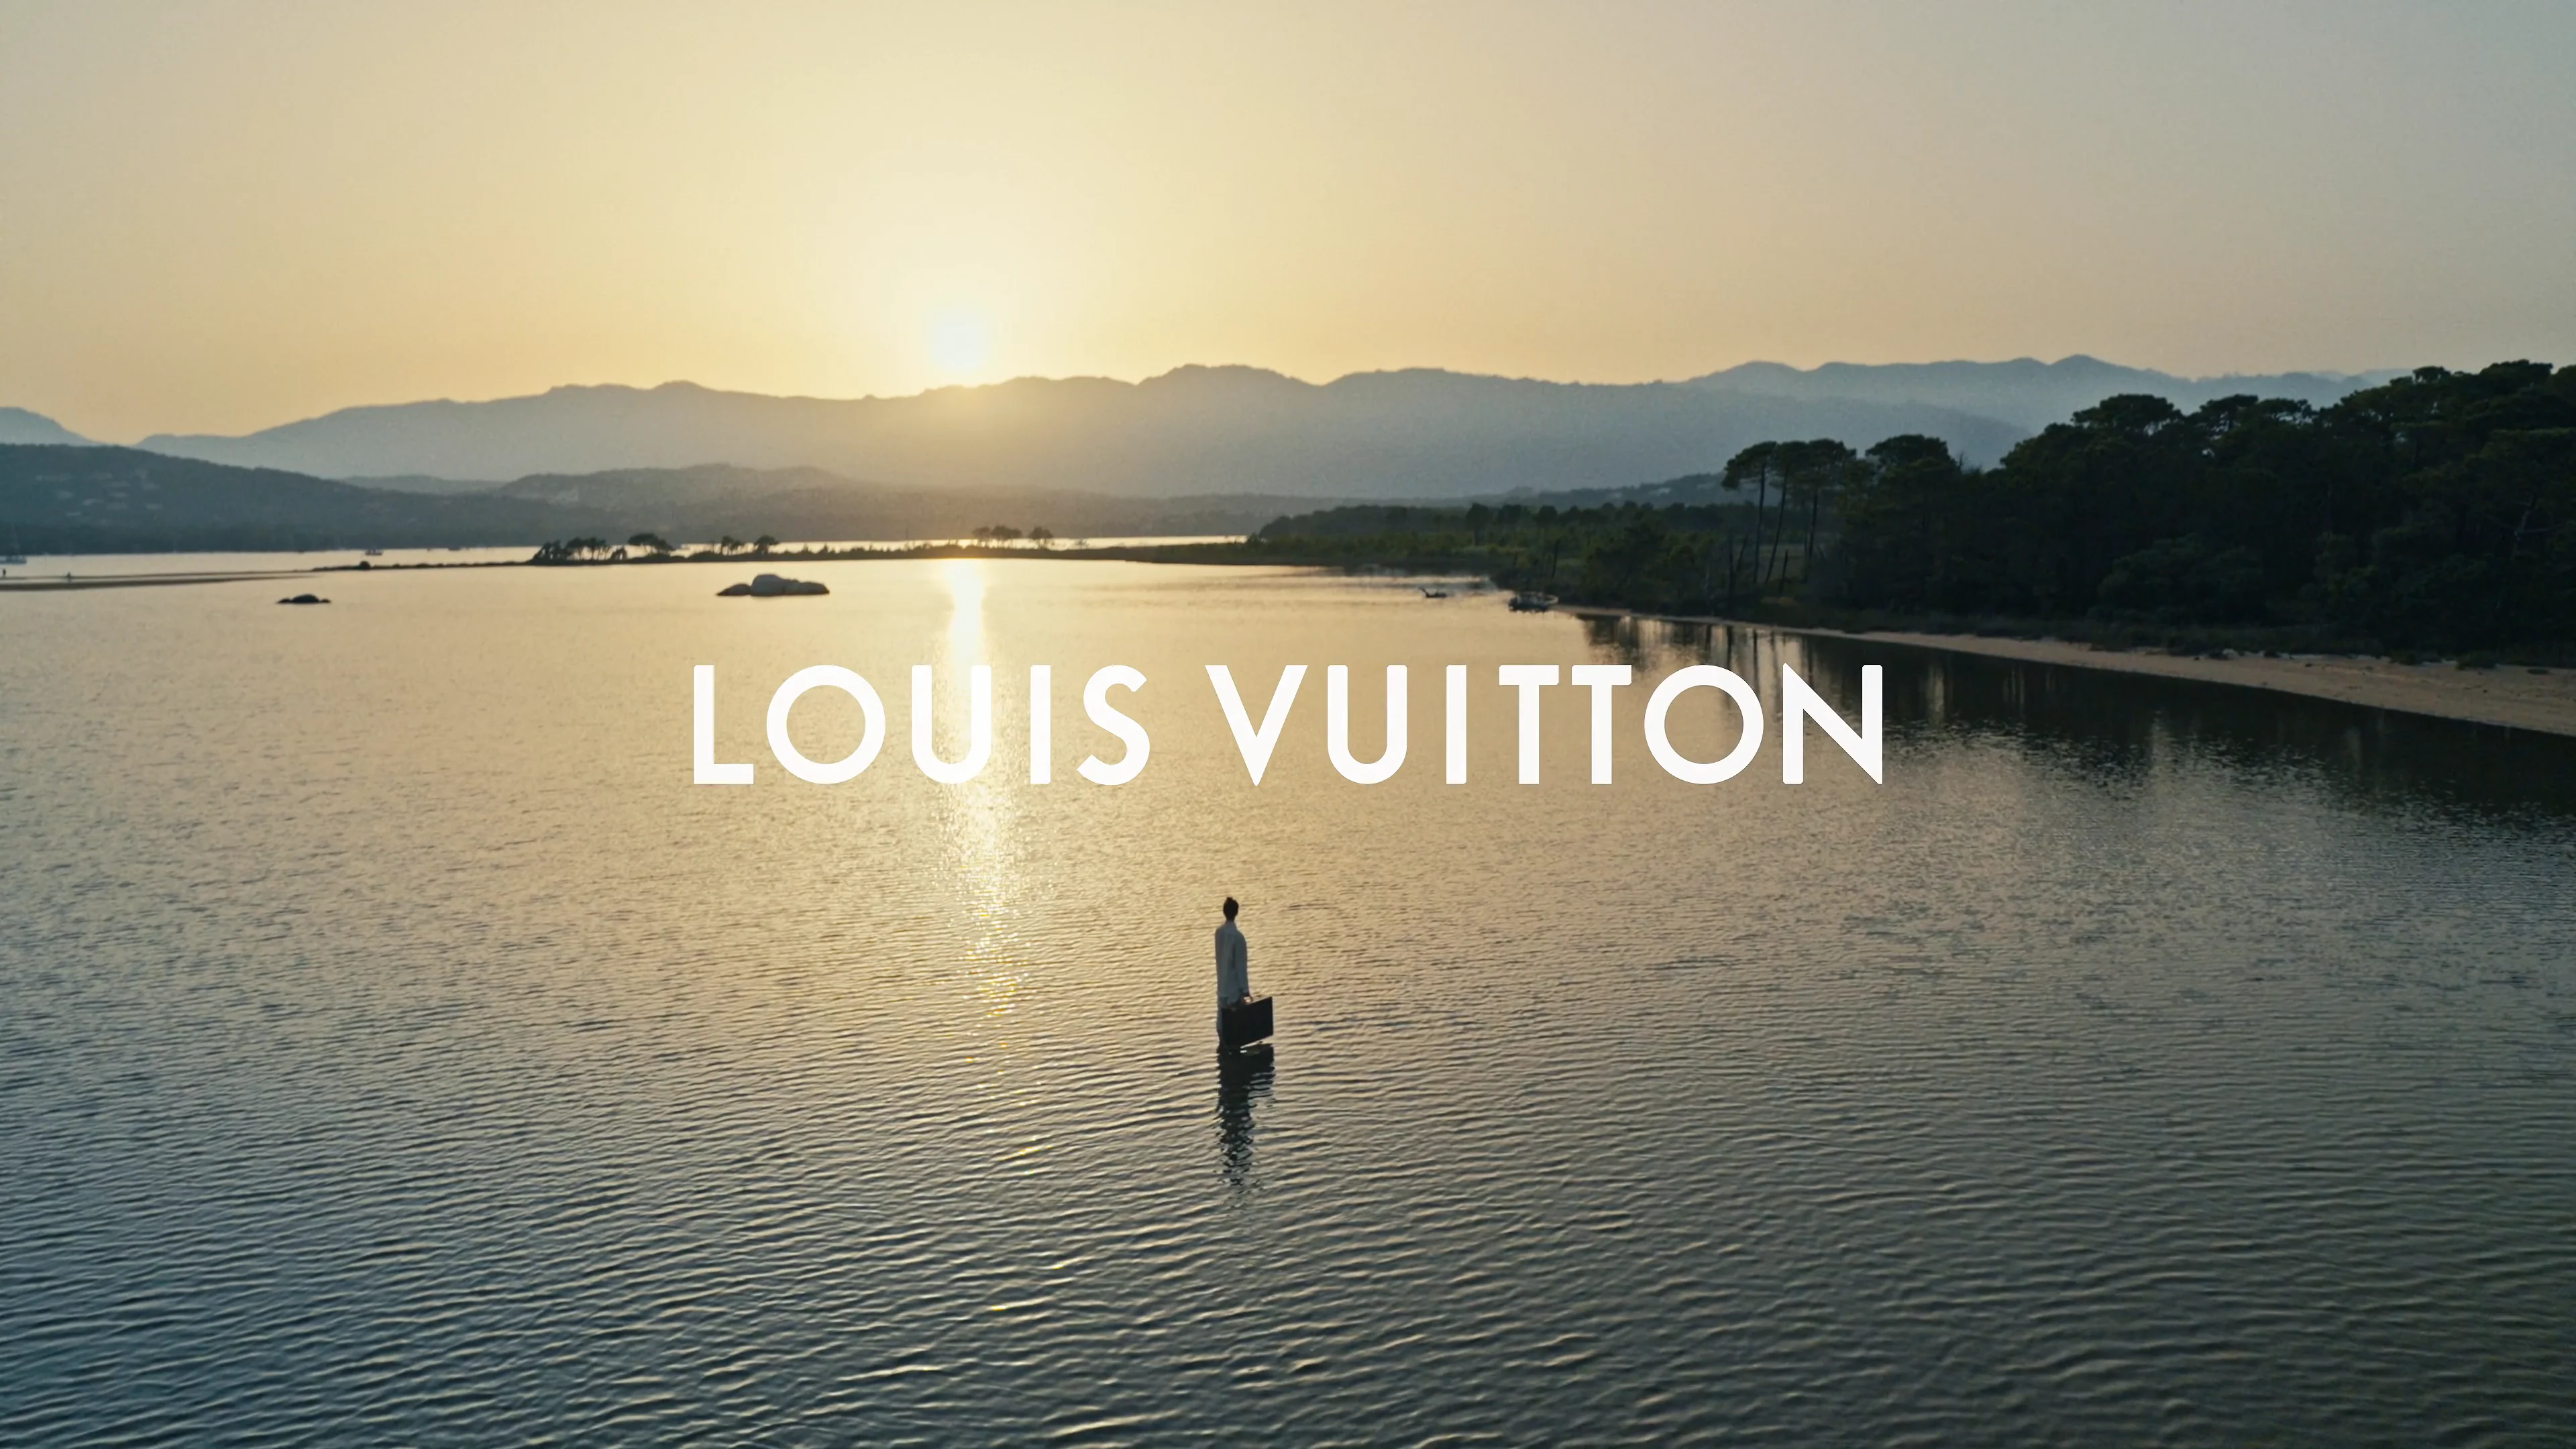 Journey of Louis Vuitton (LV) struggling and Timeless Creations 